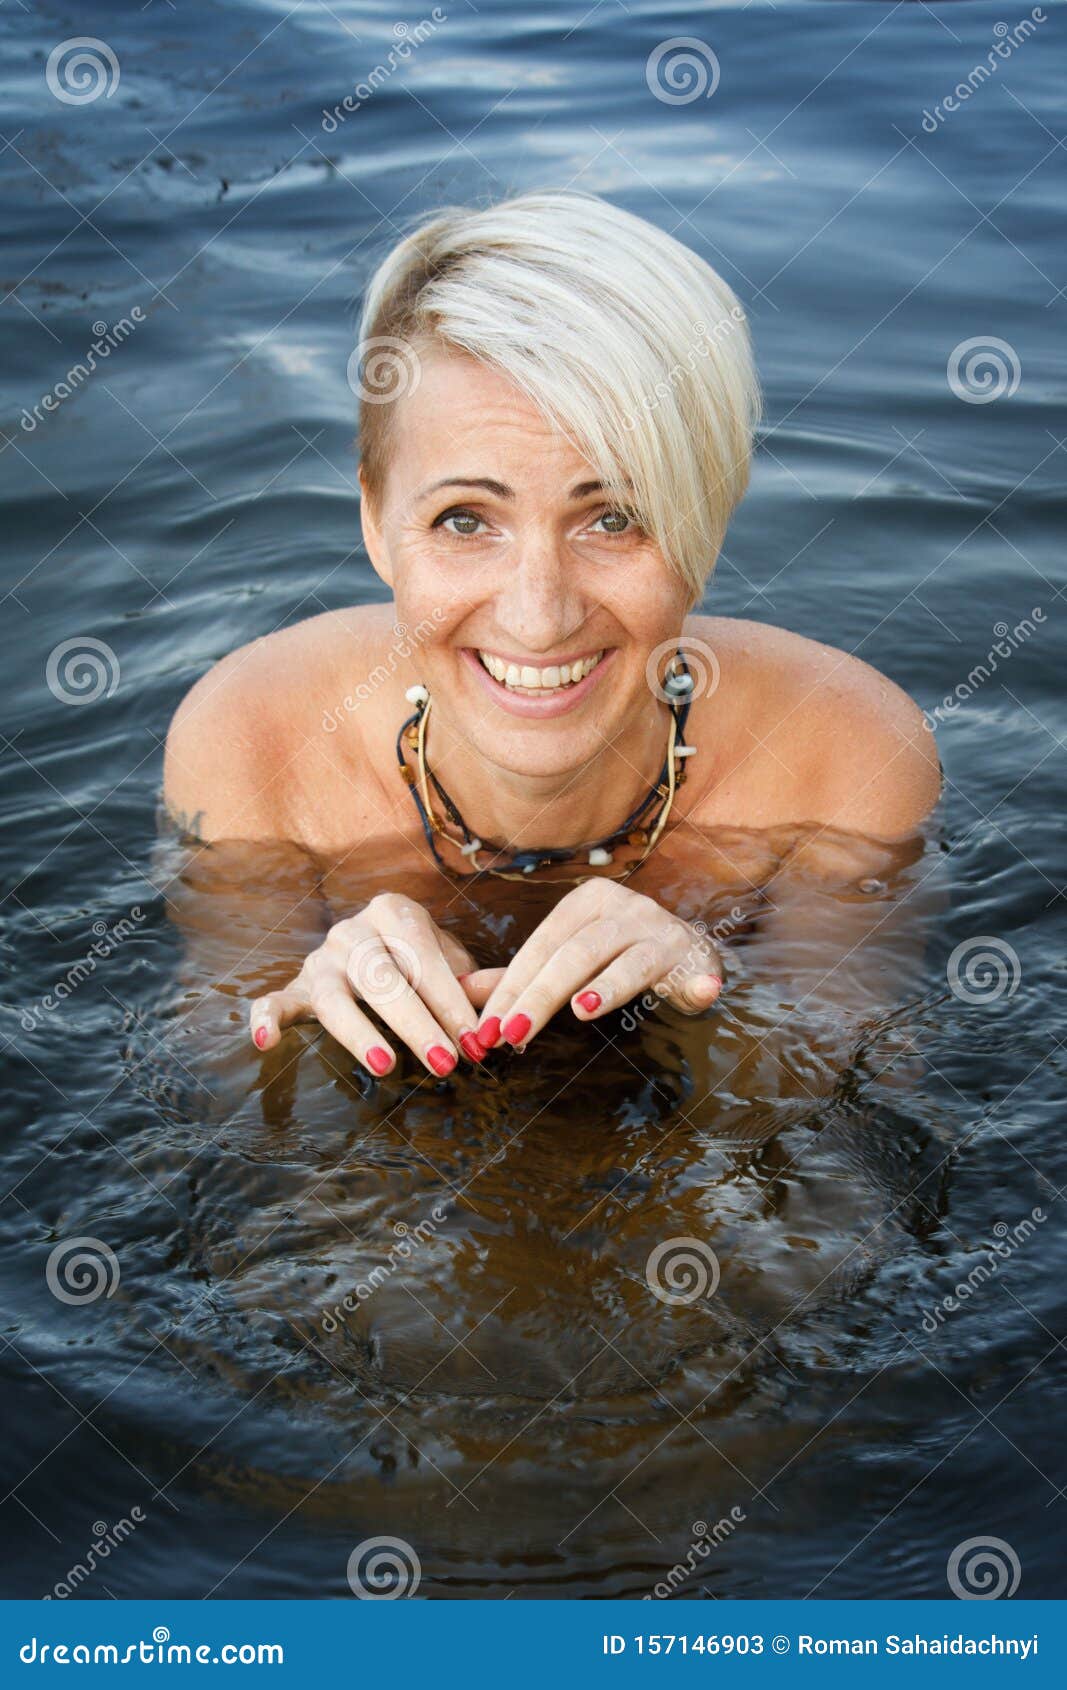 Adult Swim Naked - Close-up of a Woman Blonde Middle-aged Nude Swims in the River, Selective  Focus Stock Image - Image of harmony, natural: 157146903